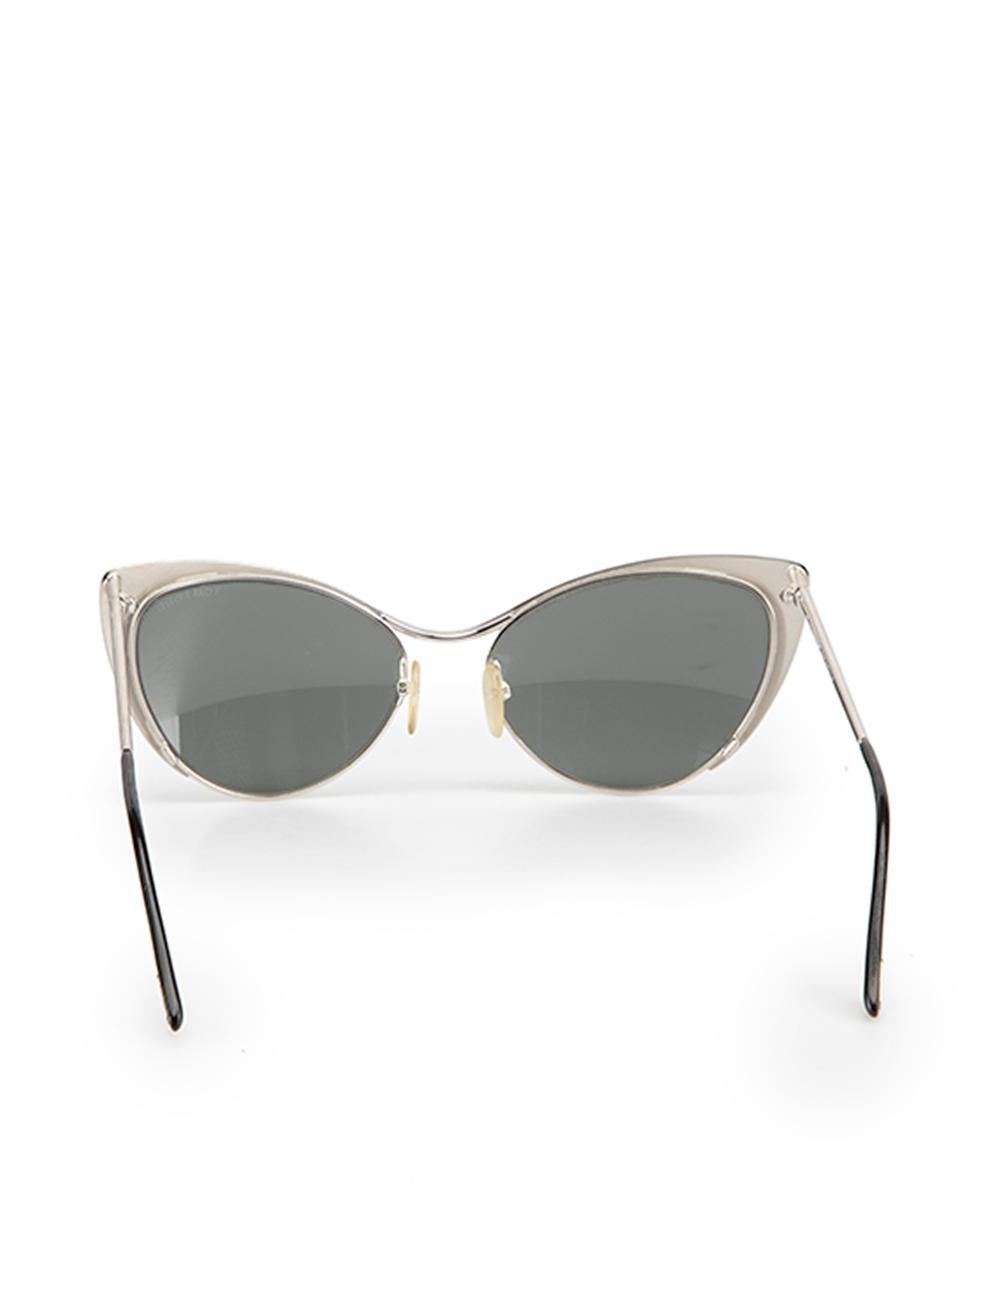 Tom Ford Silver Half Frame Cat Eye Sunglasses In Excellent Condition For Sale In London, GB